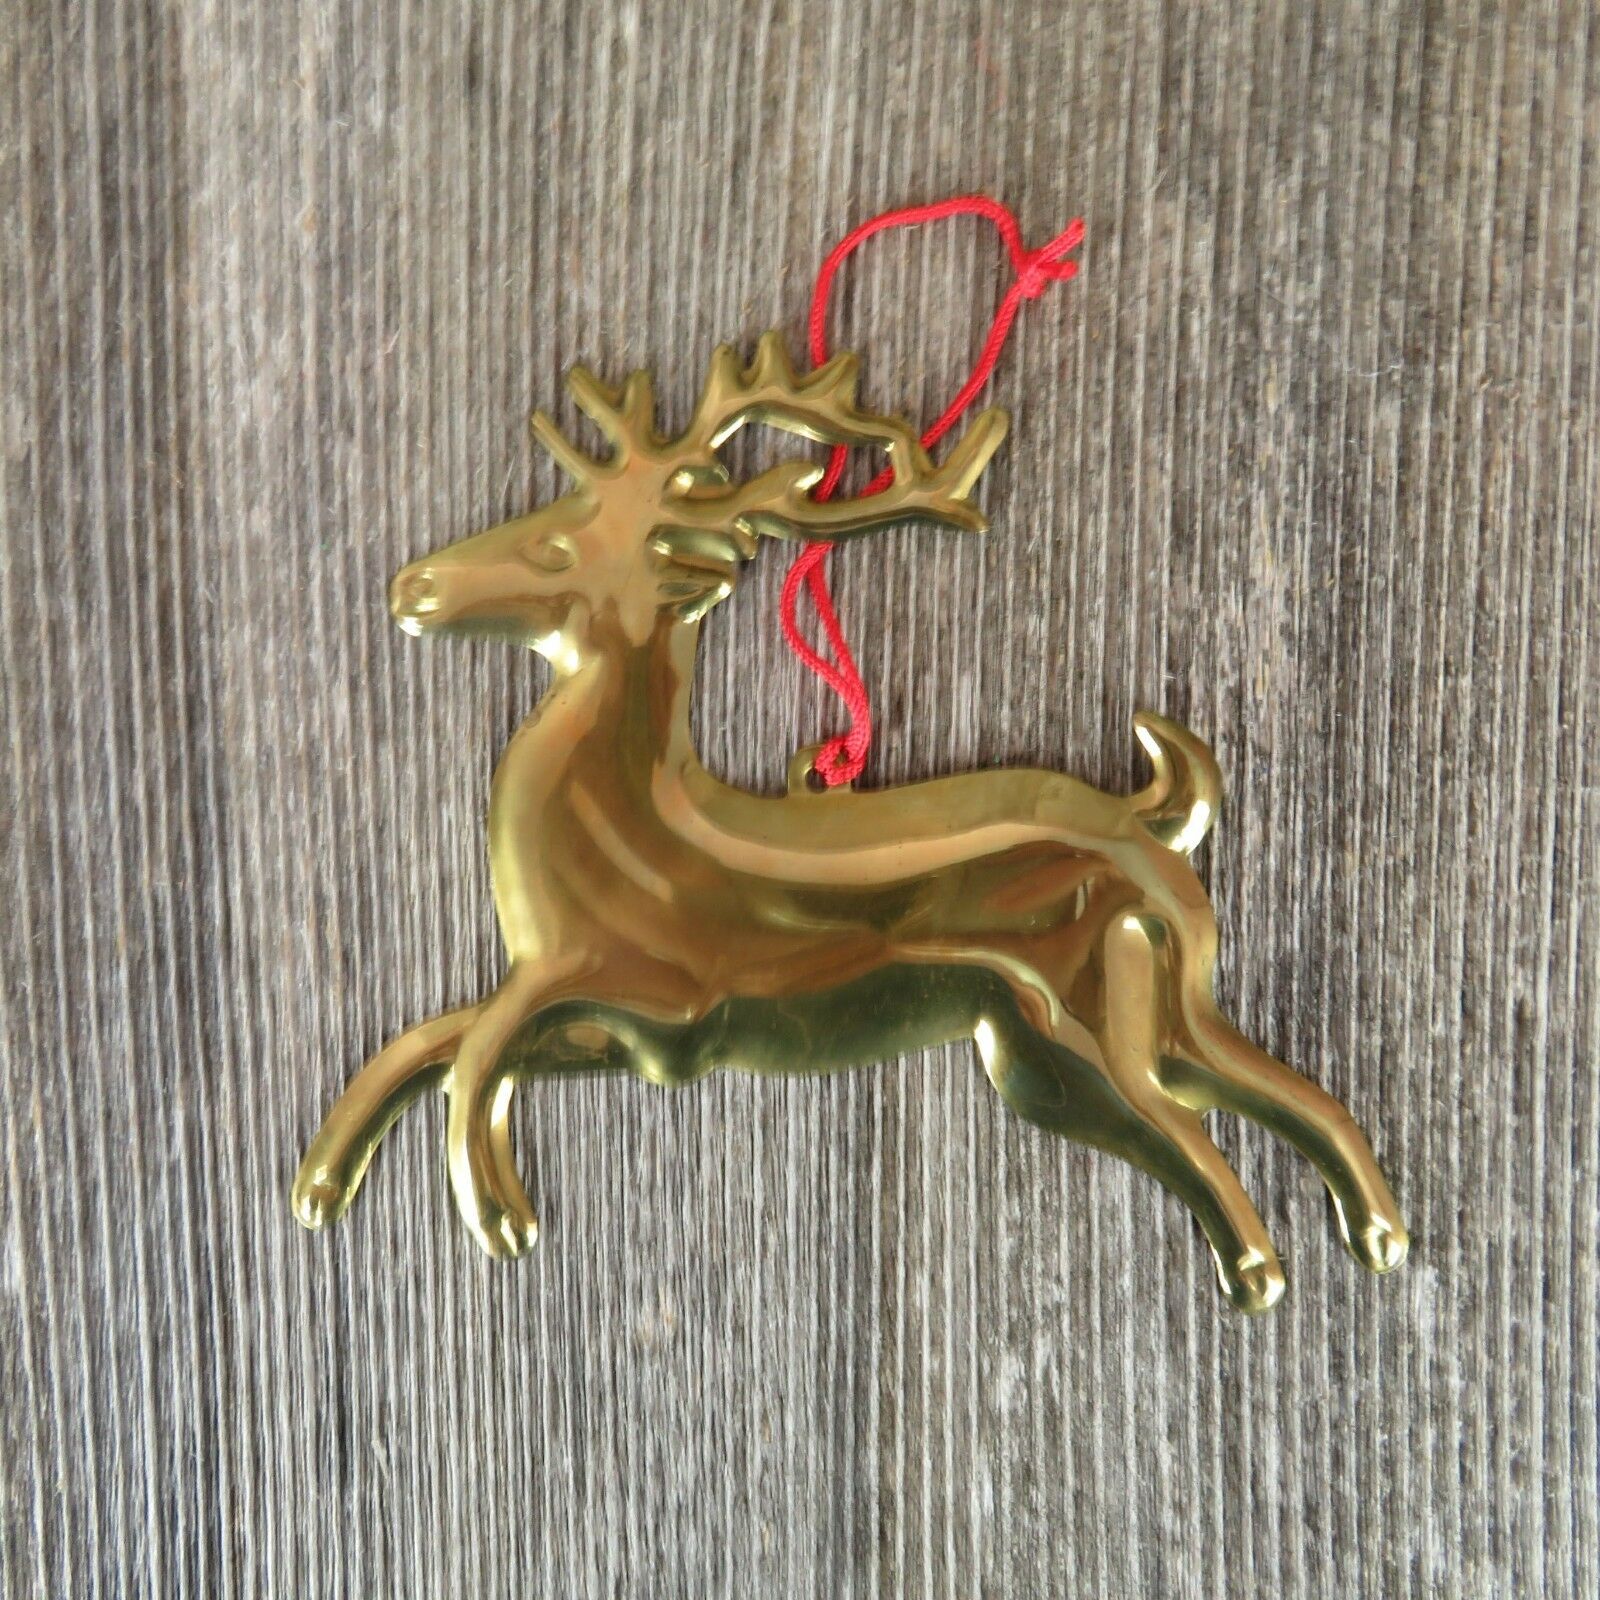 Vintage Reindeer Metal Gold Plated Ornament Department 56 Christmas Brass - At Grandma's Table